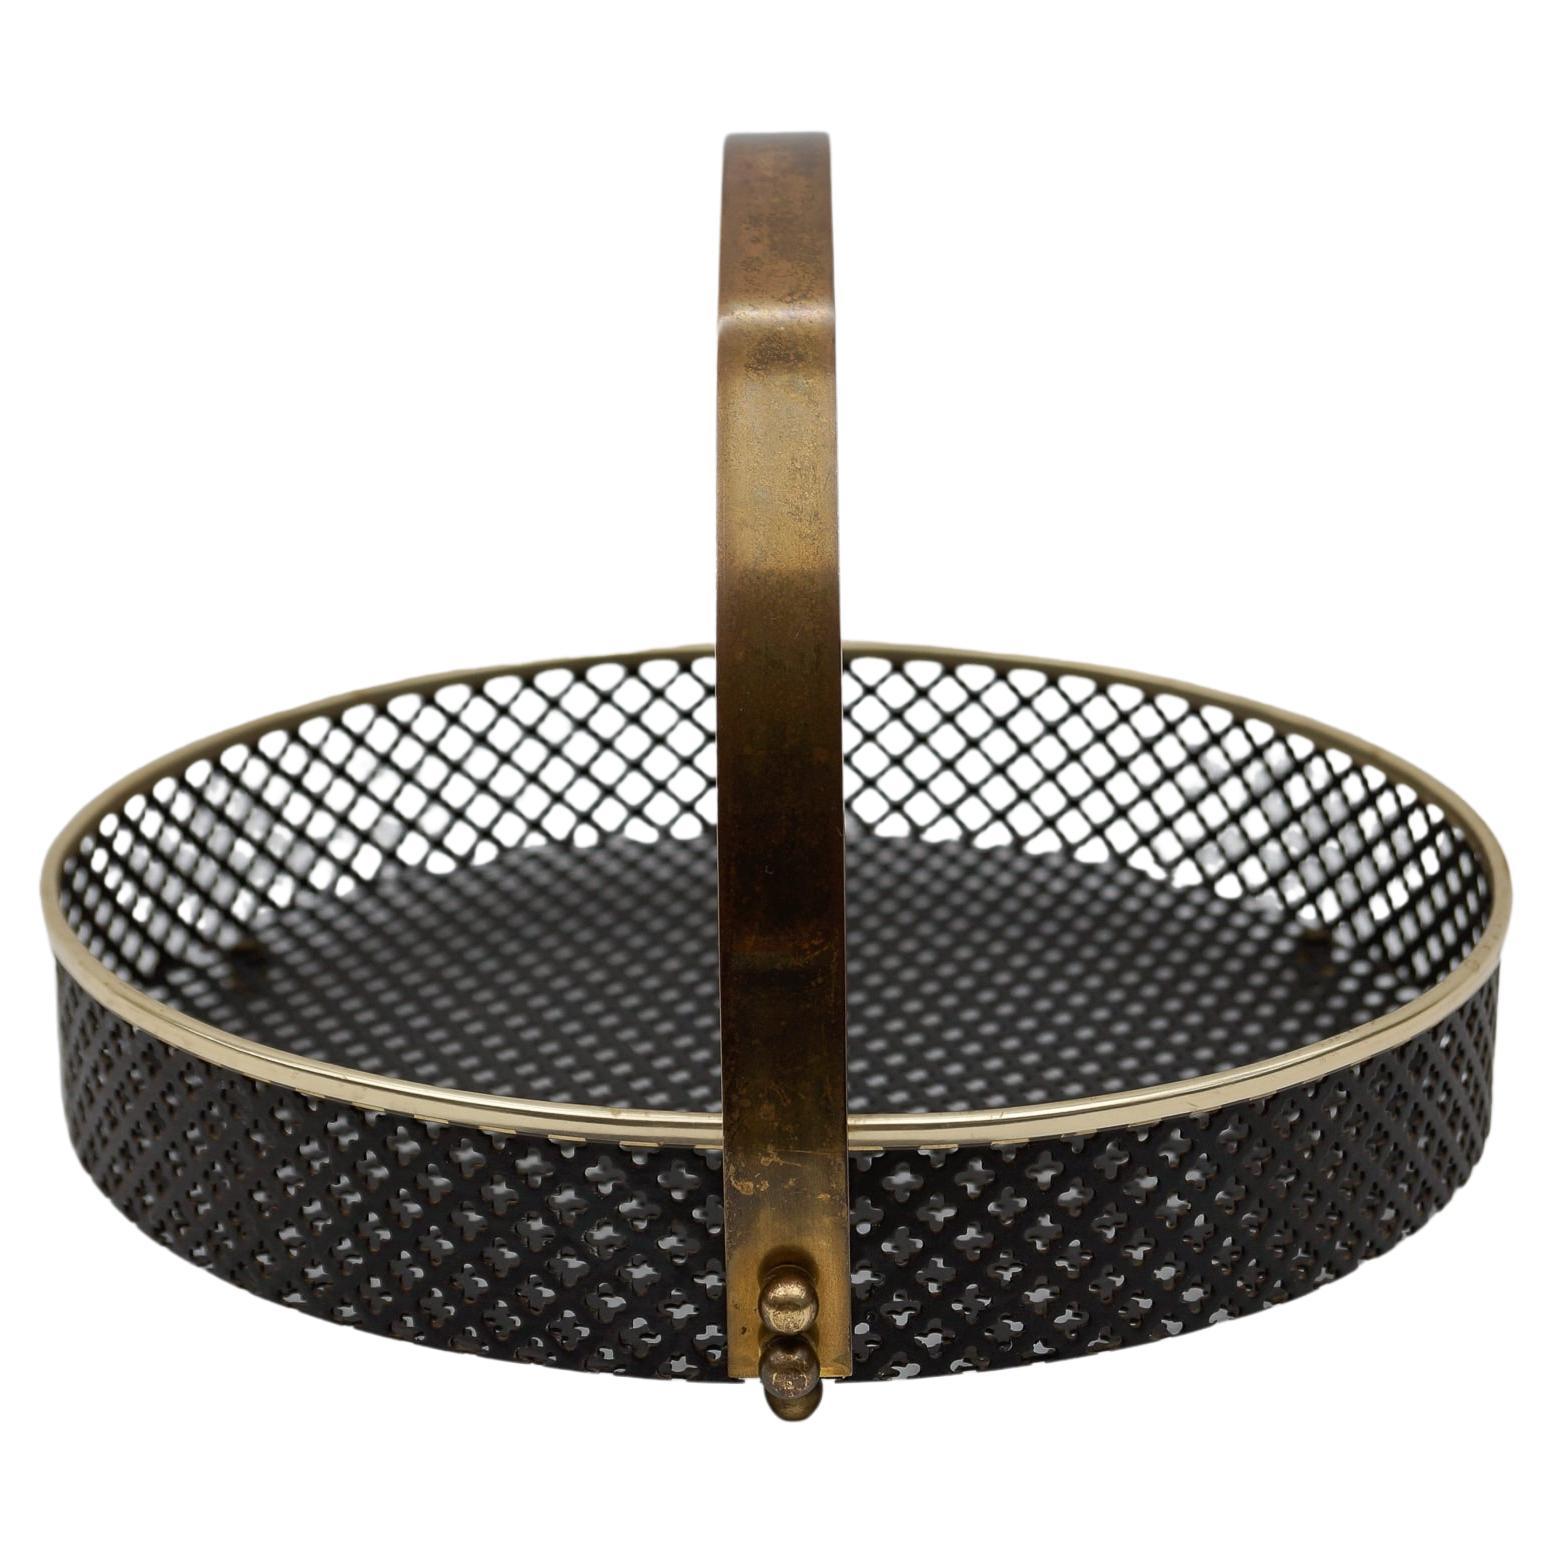 Small Mategot style perforated metal portable serving tray with brass handle